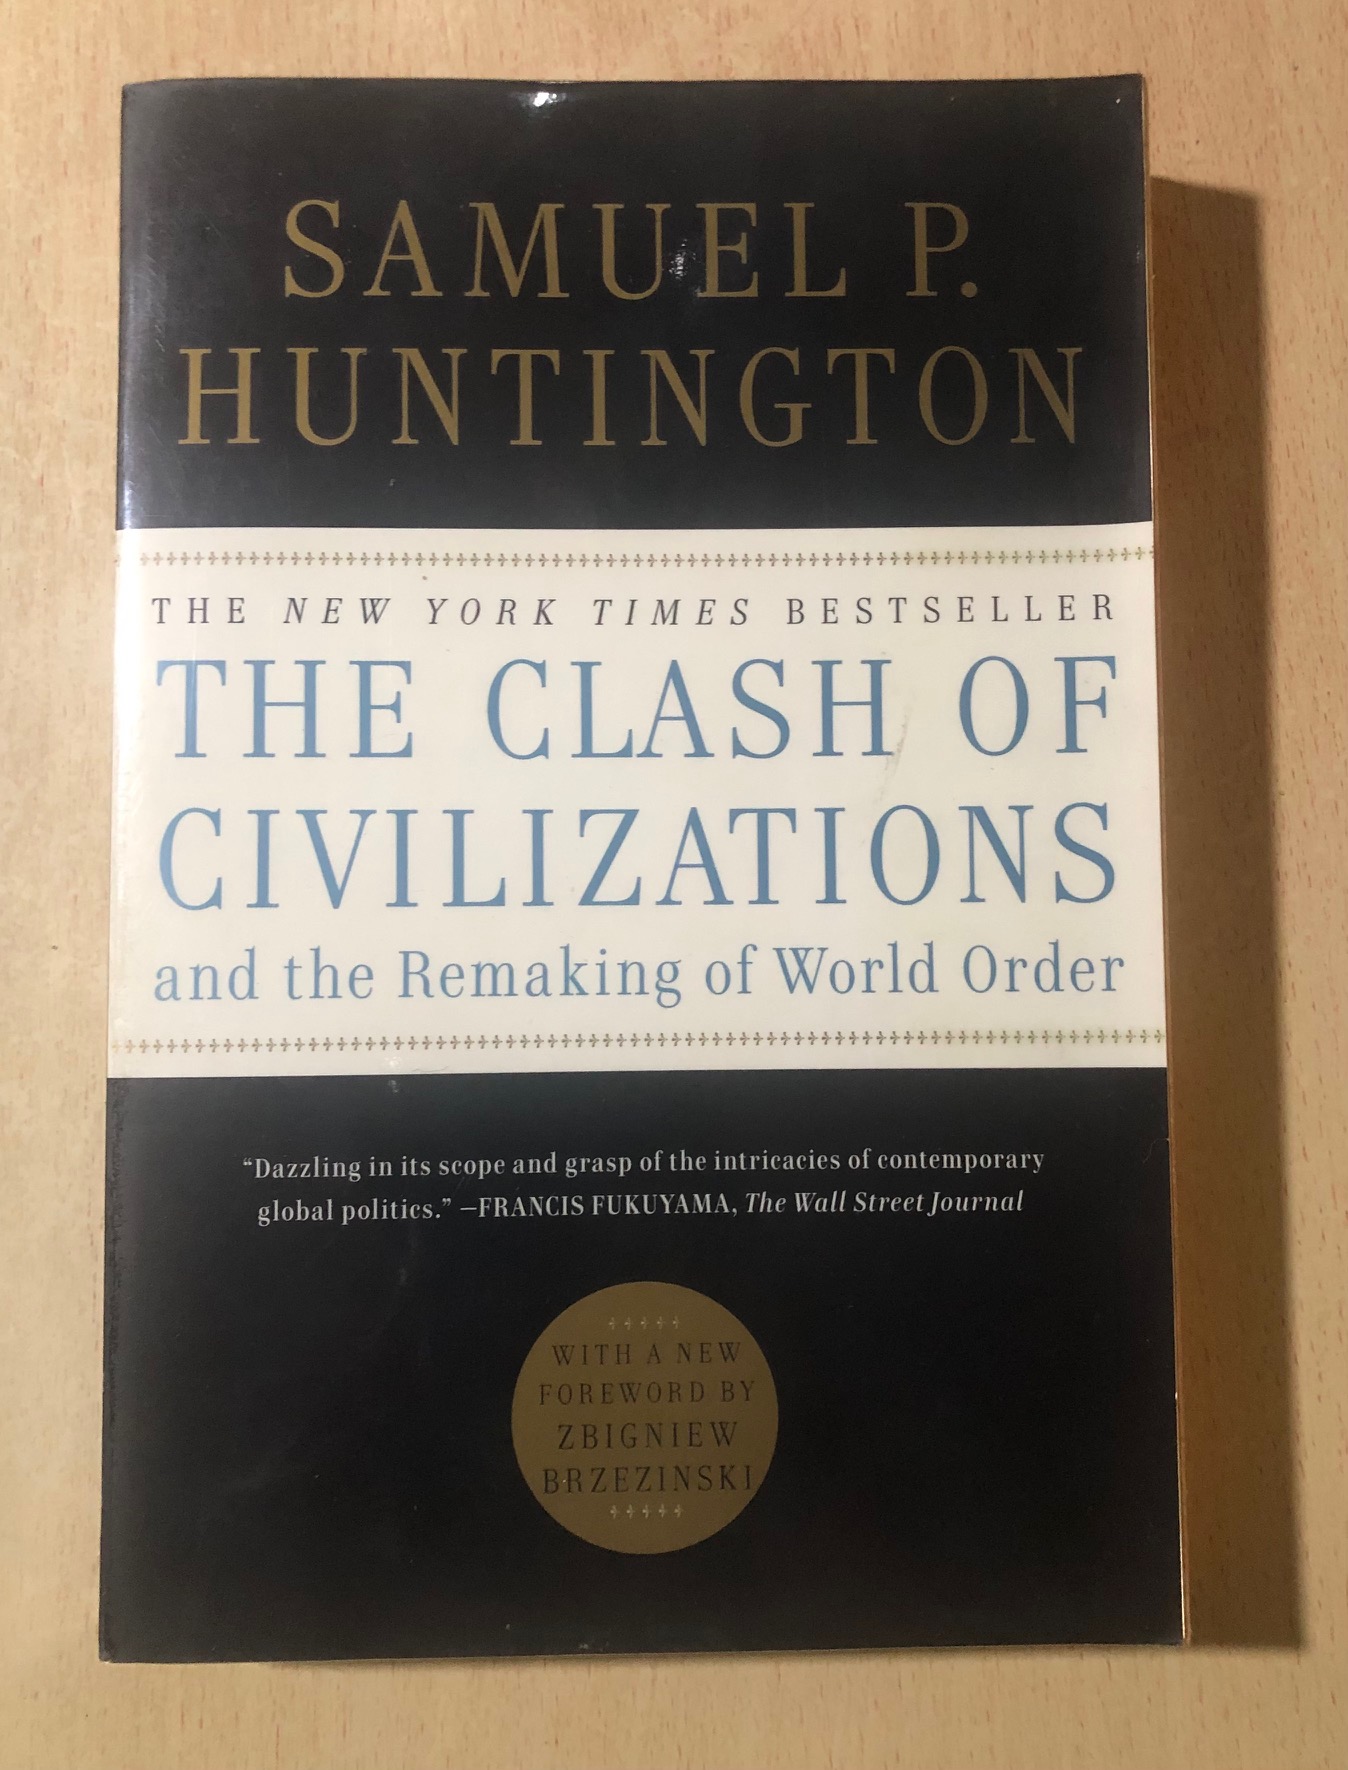 P.　Lazada　and　Huntington　Samuel　Clash　PH　PRELOVED]　by　World　of　Civilizations　The　Remaking　Order　of　the